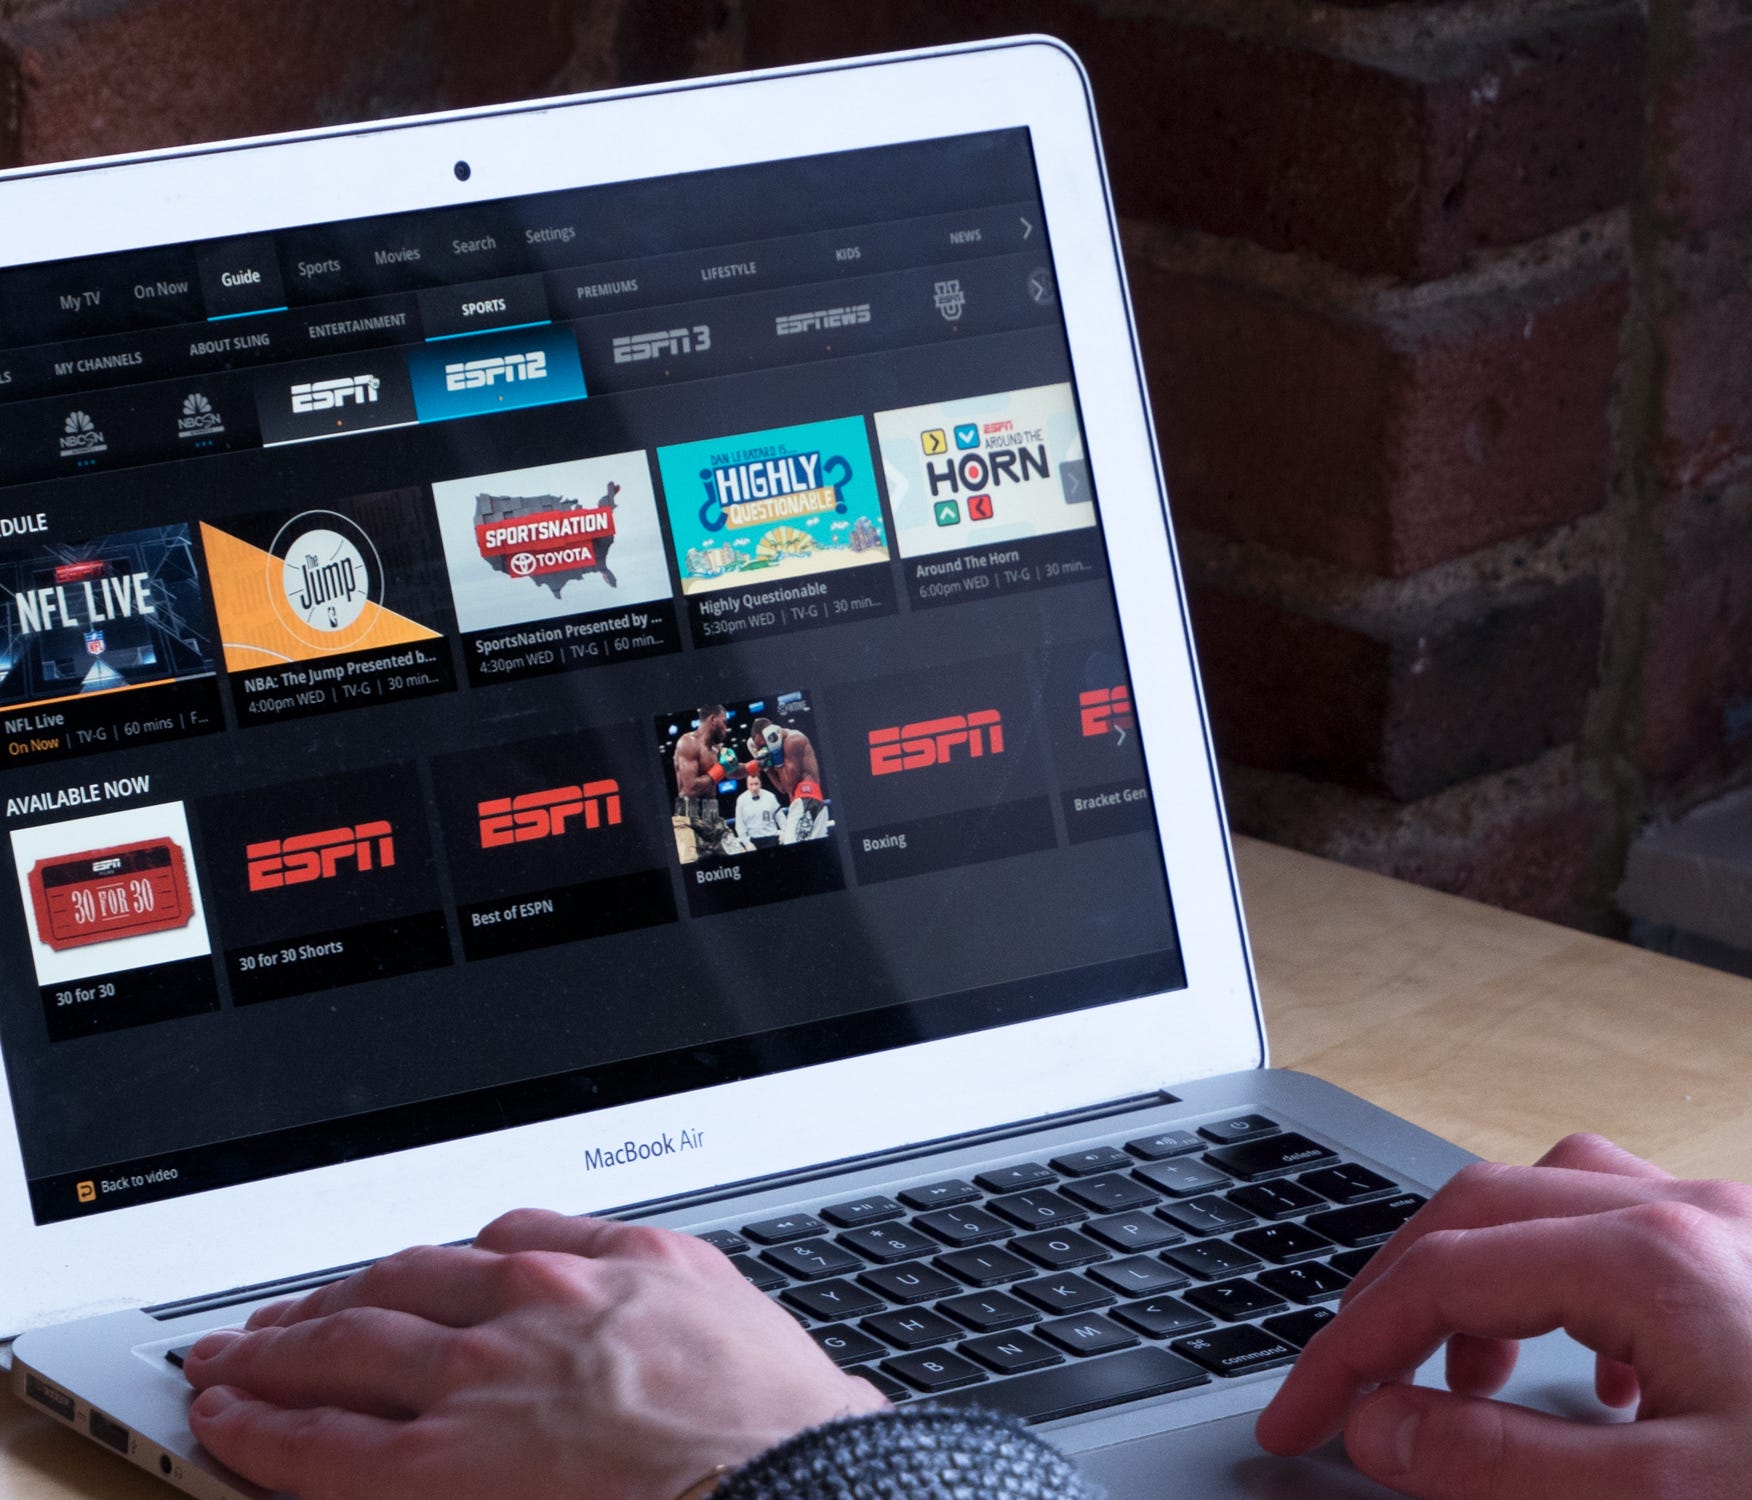 I replaced my cable with Sling TV for a year—here's what I've learned